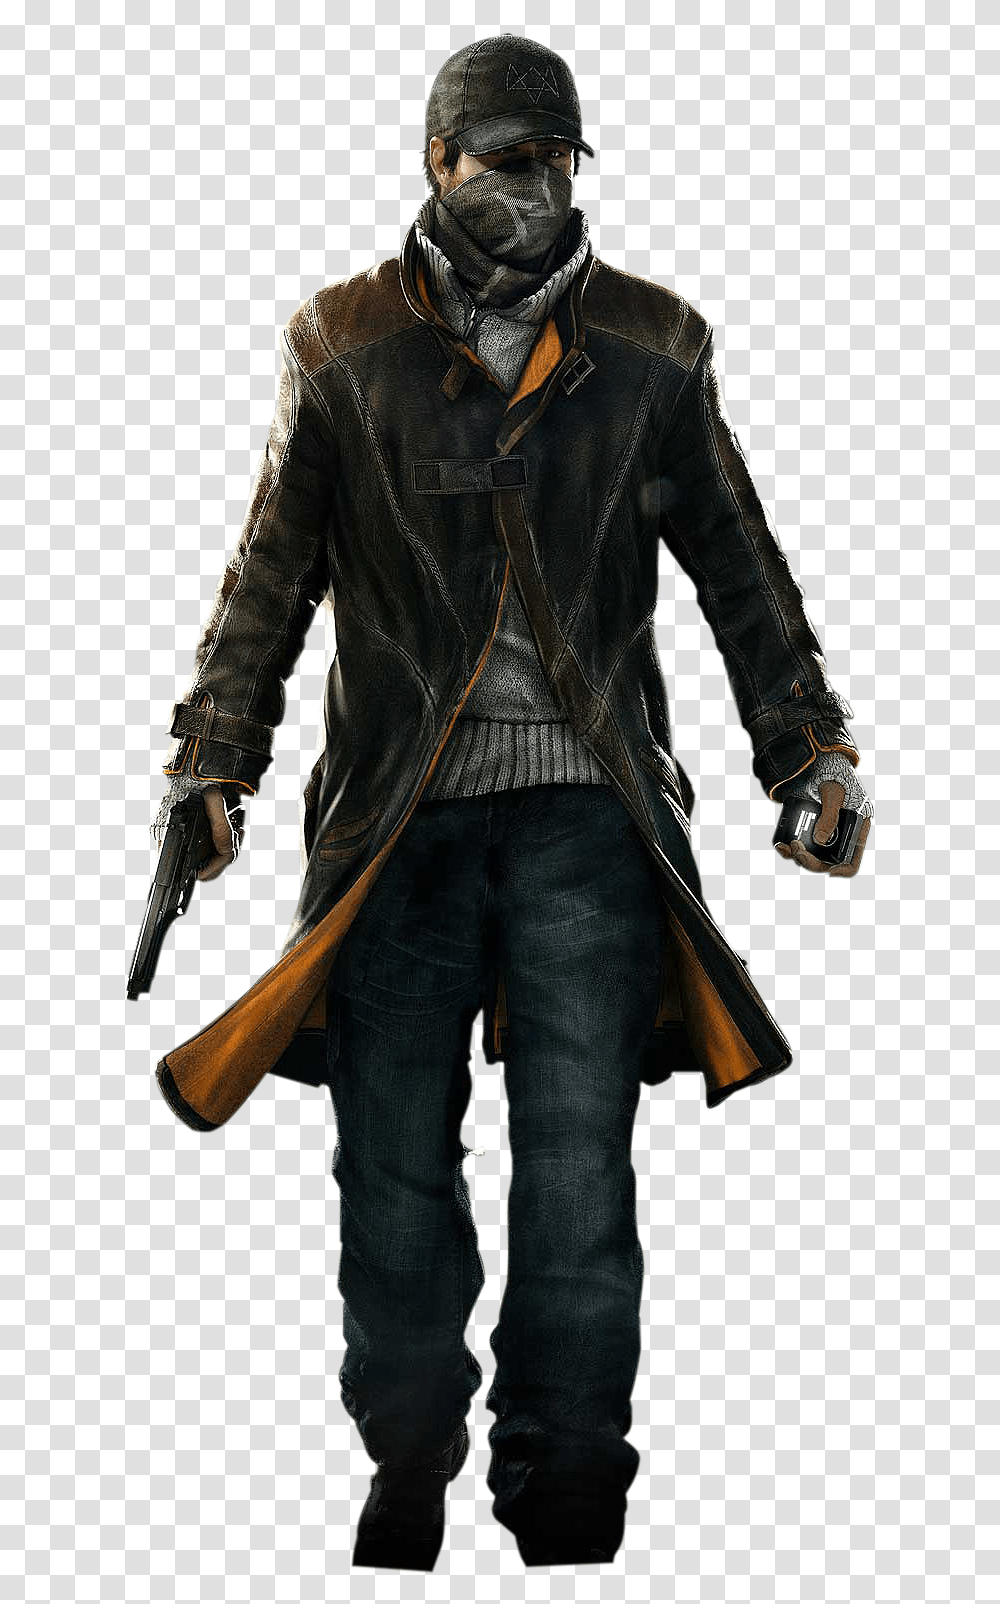 Watch Dogs Aiden Pearce, Apparel, Jacket, Coat Transparent Png